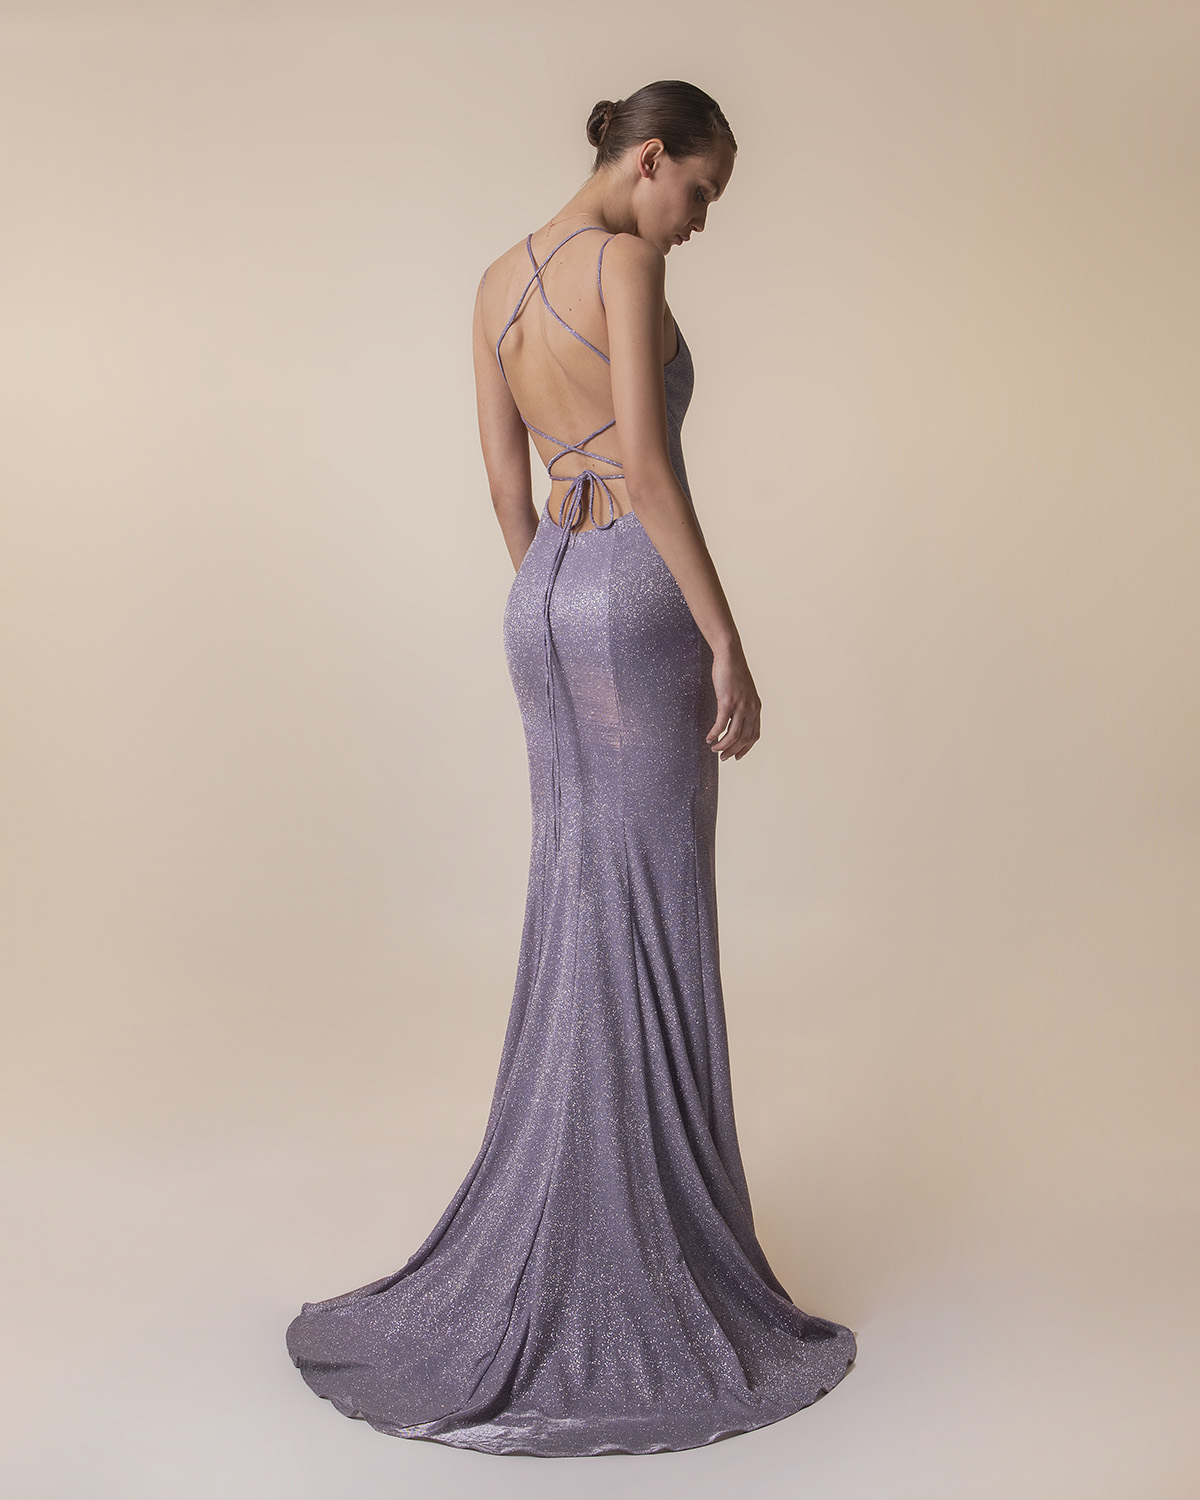 Long evening dress with shining fabric and open back